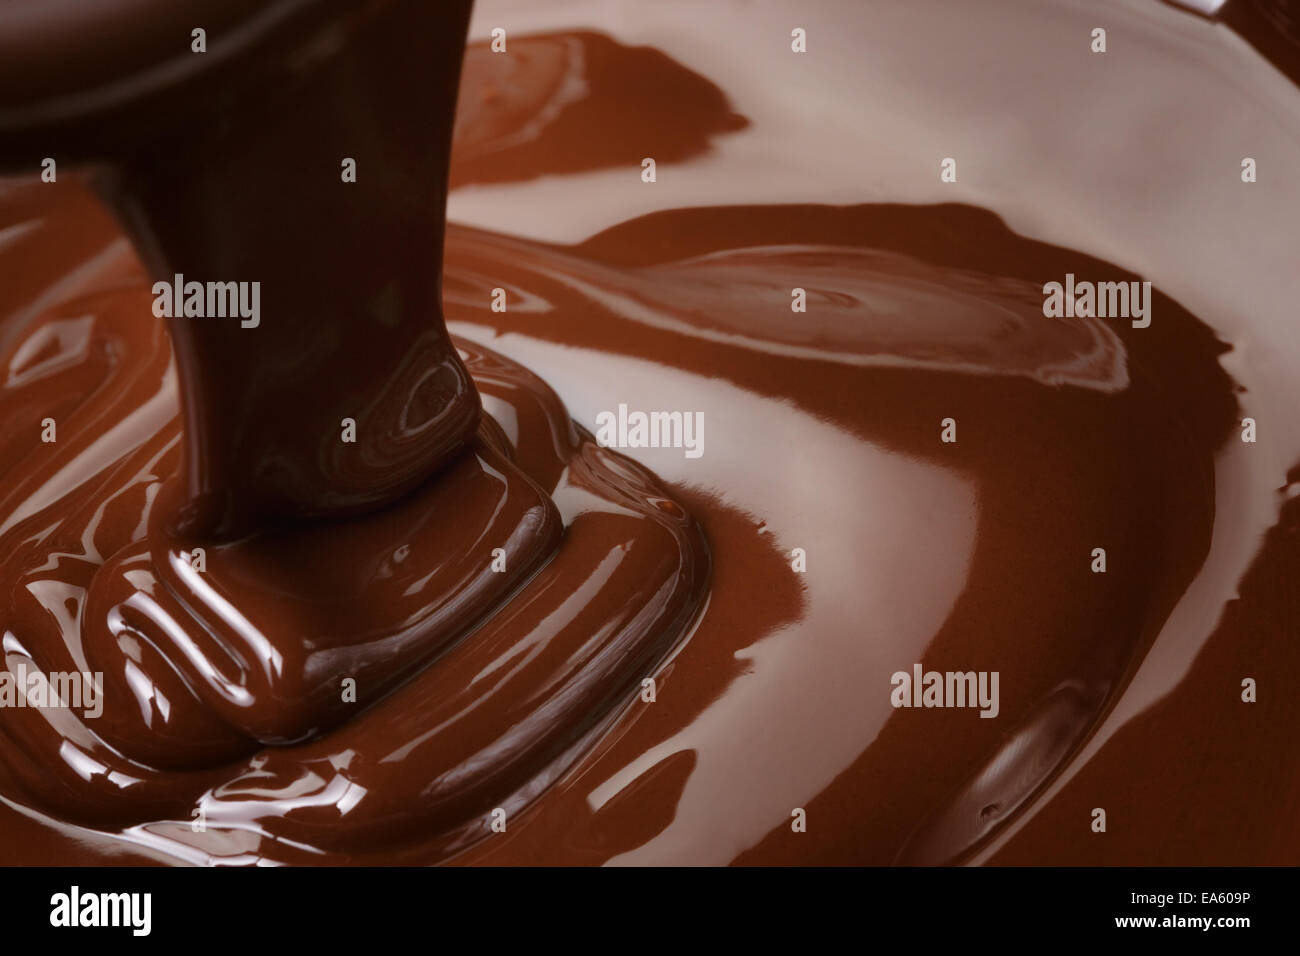 melted dark chocolate flow, candy or chocolate preparation background Stock Photo